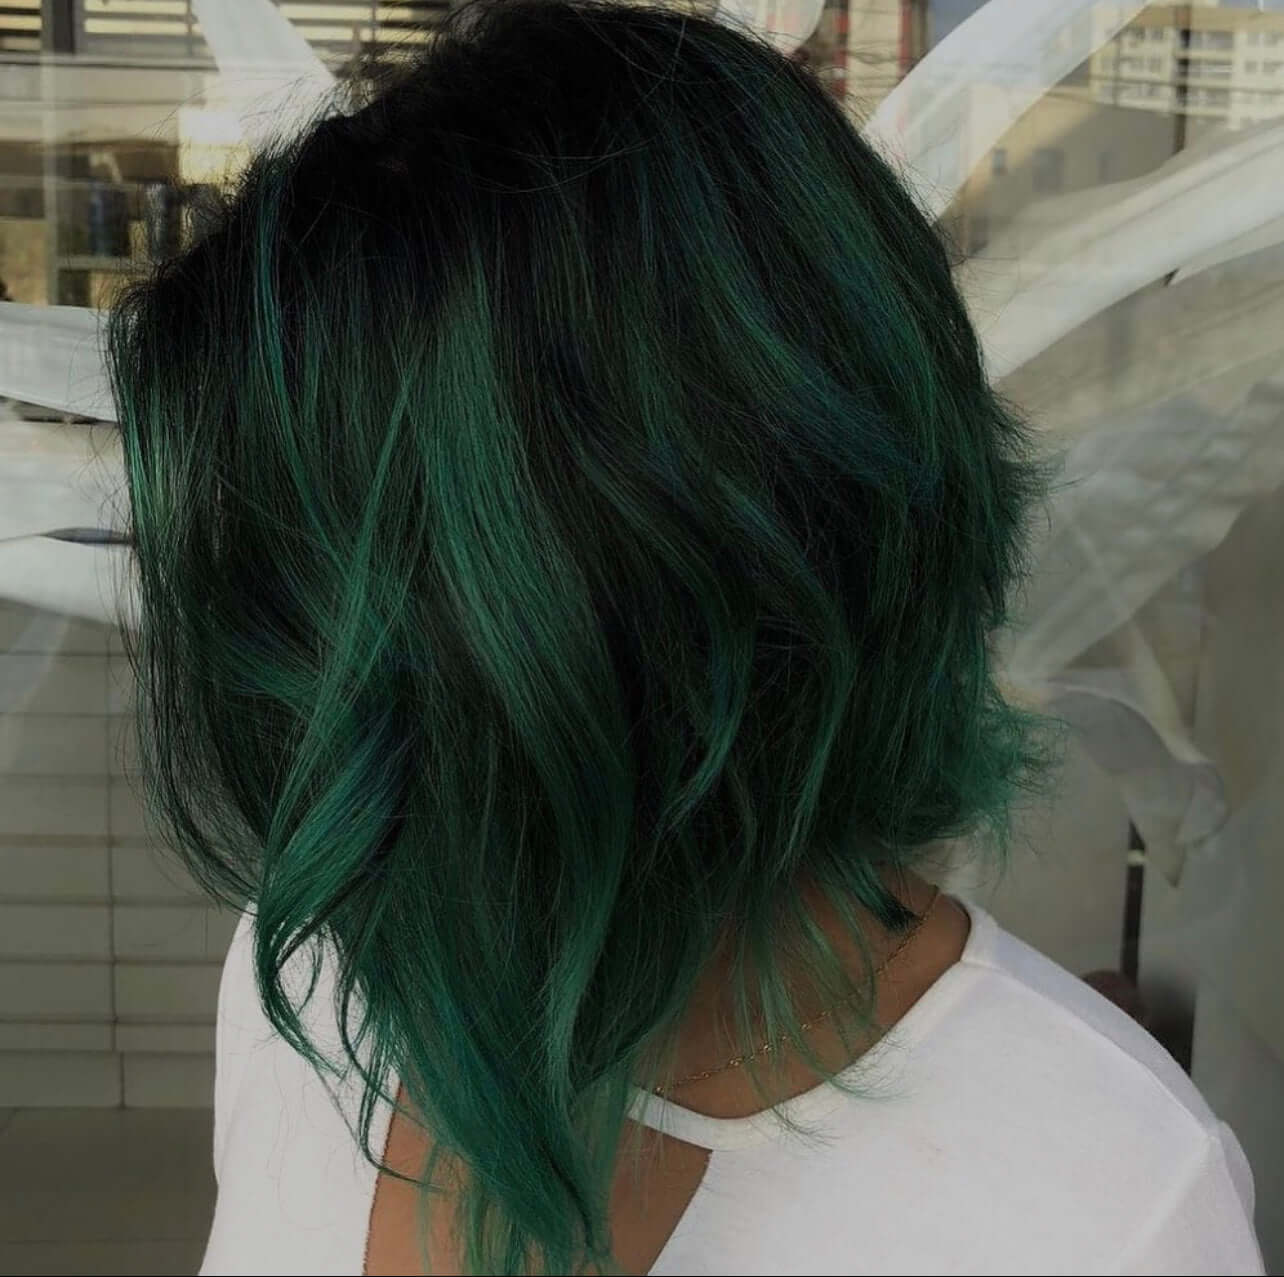 Studio 28 Hair  Beauty  Lovely emerald green ombré for this lovely lady    Facebook